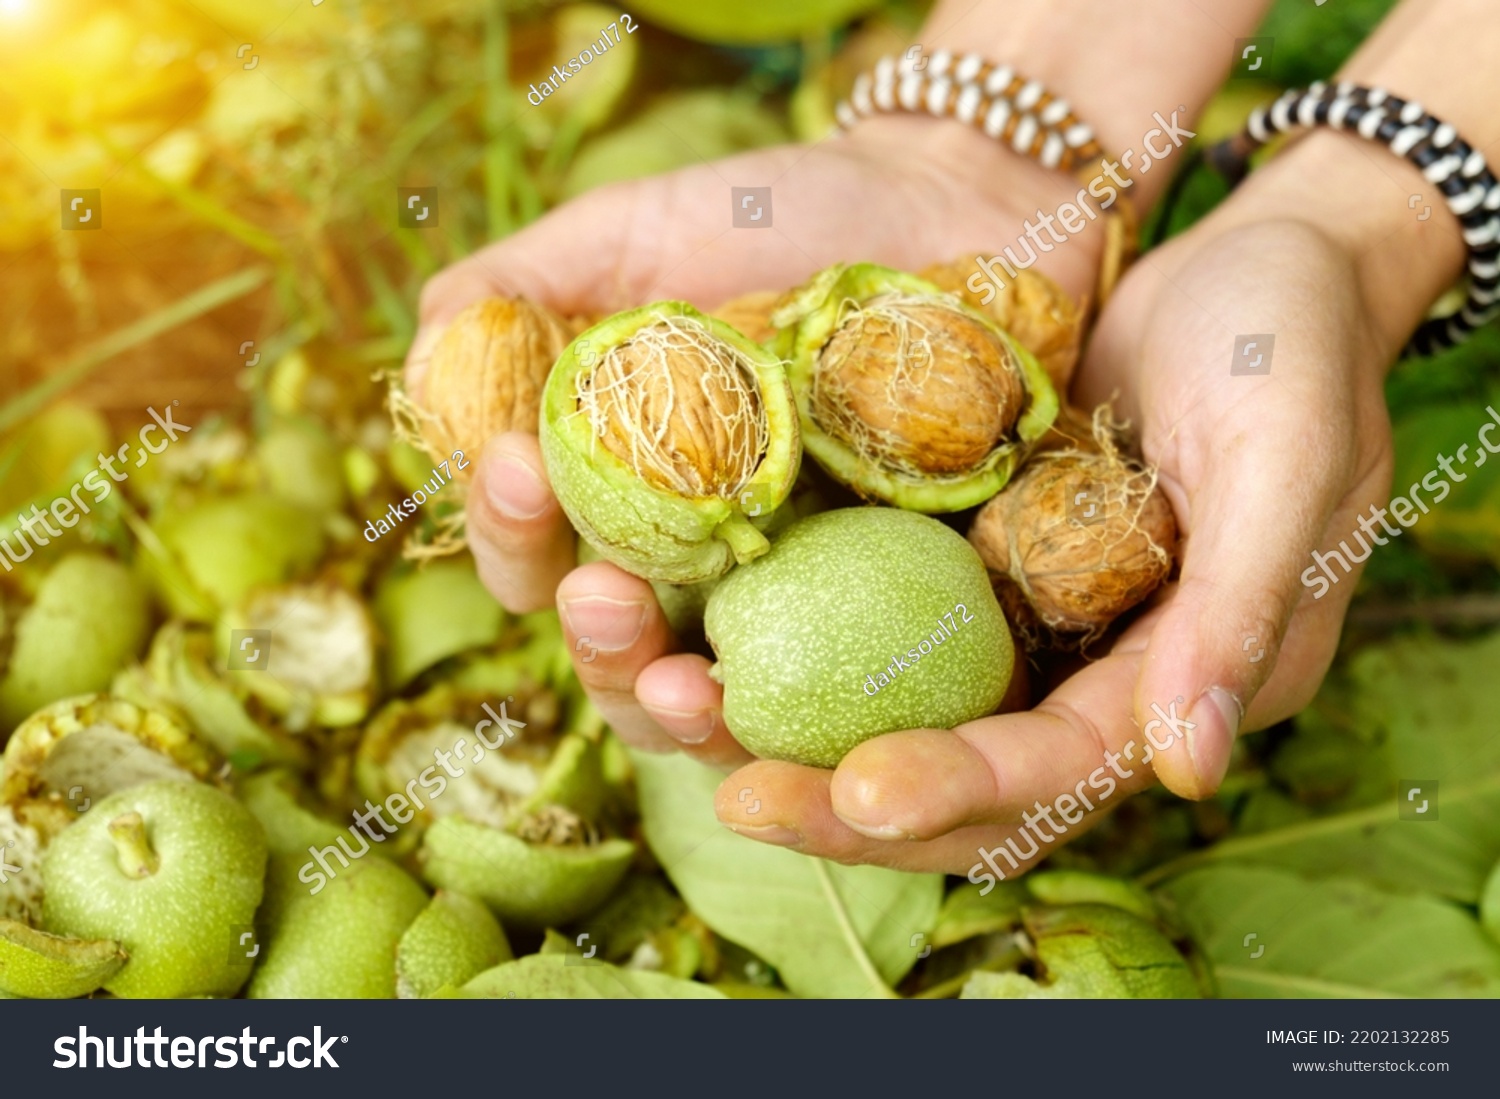 Ripe Walnut with green shell on greenery background in hand. Walnut in green peel. Selective focus #2202132285